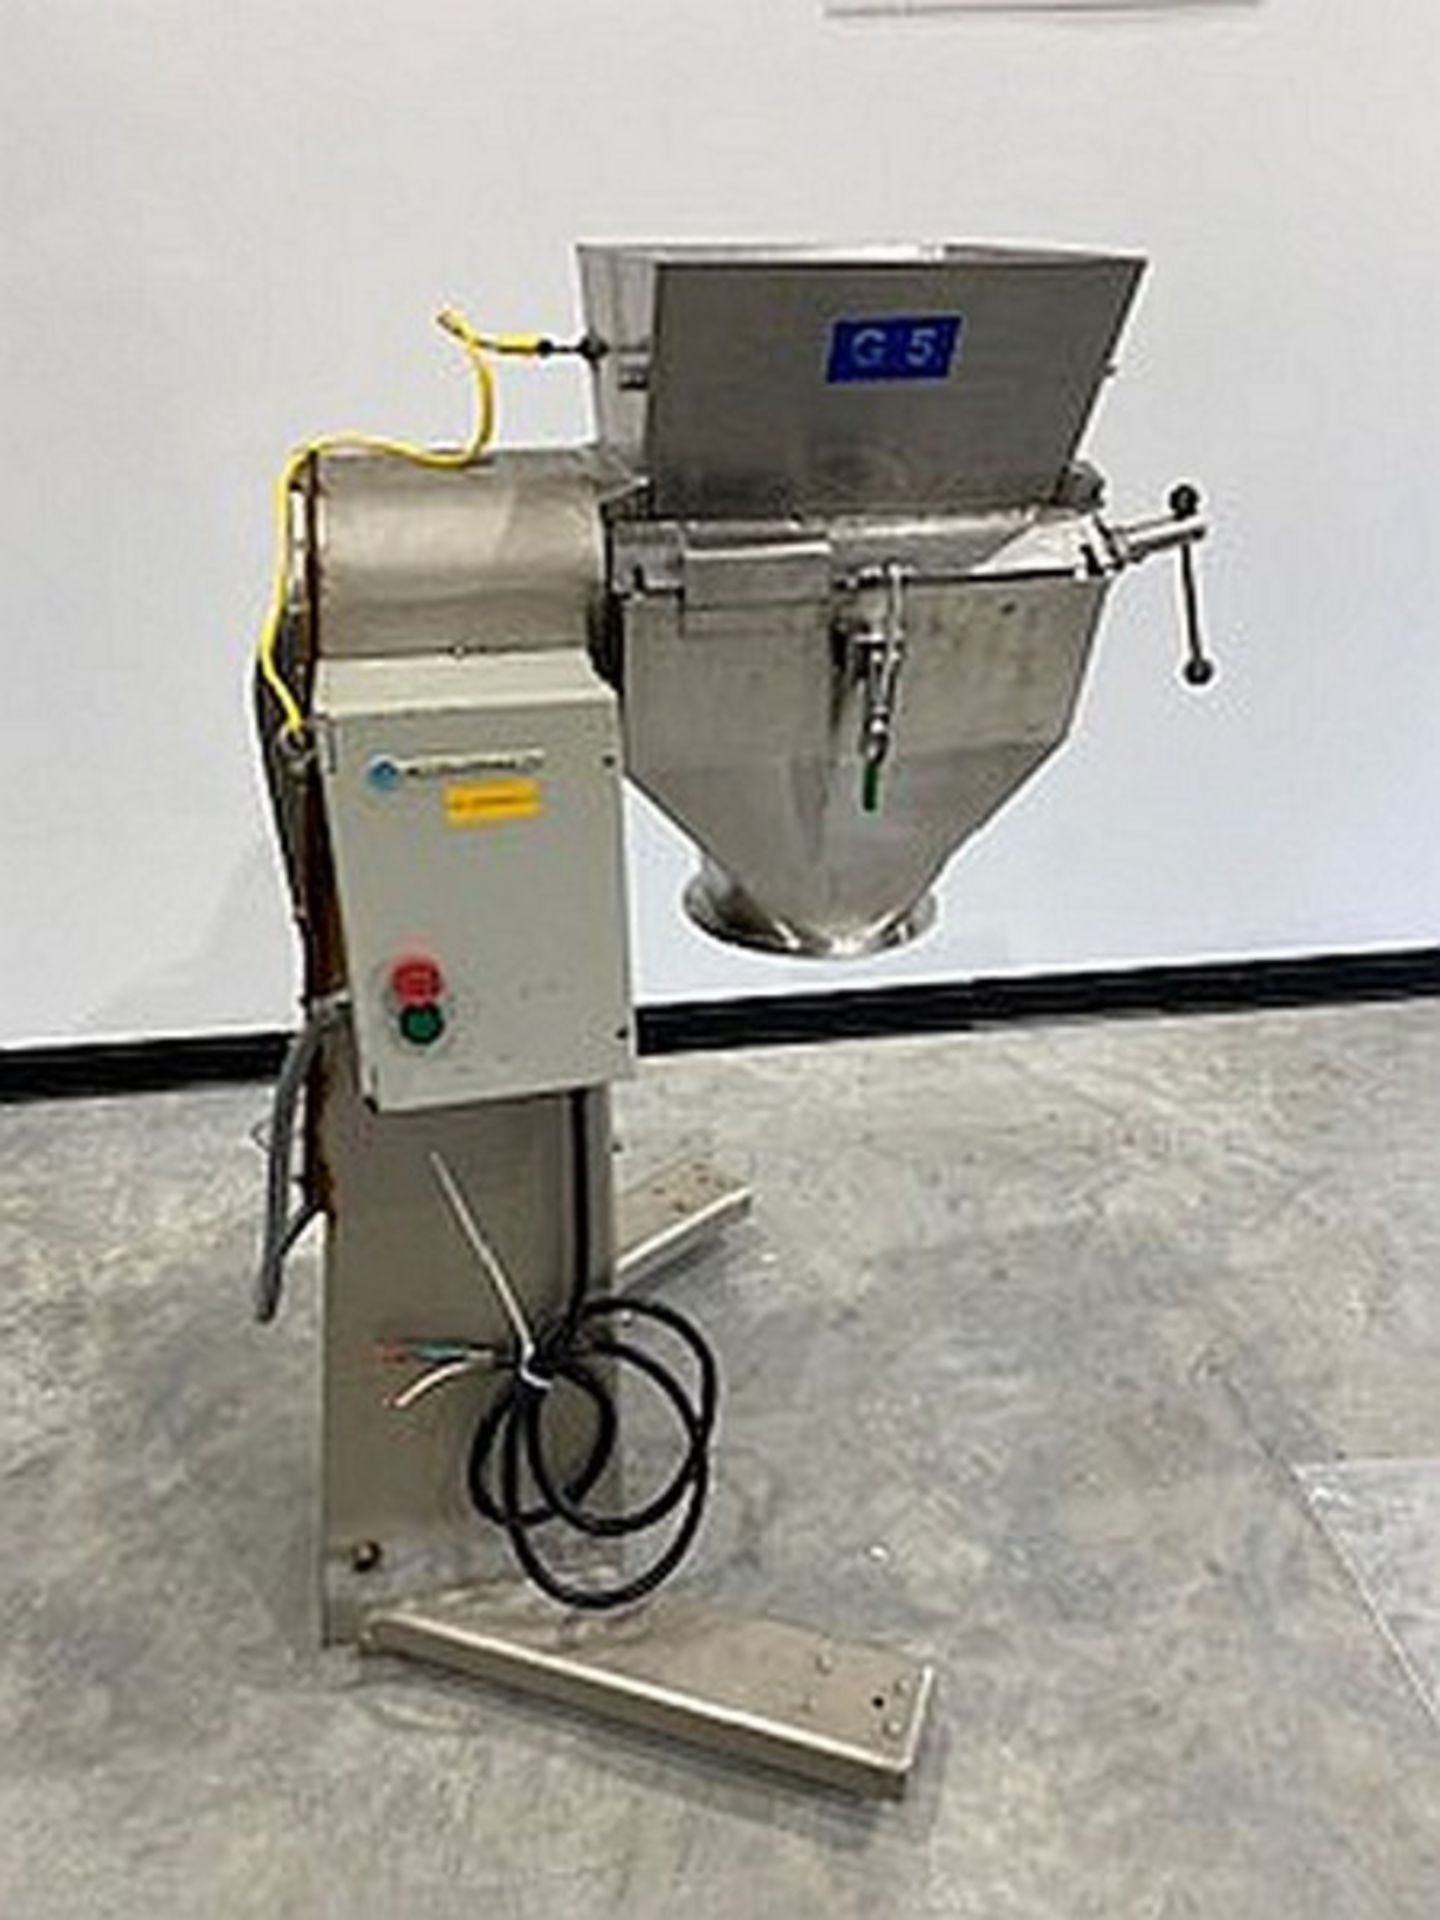 Stokes Oscillator - Model: 43-4. Comes with Discharge Chute, screen and locking arms. Driven by